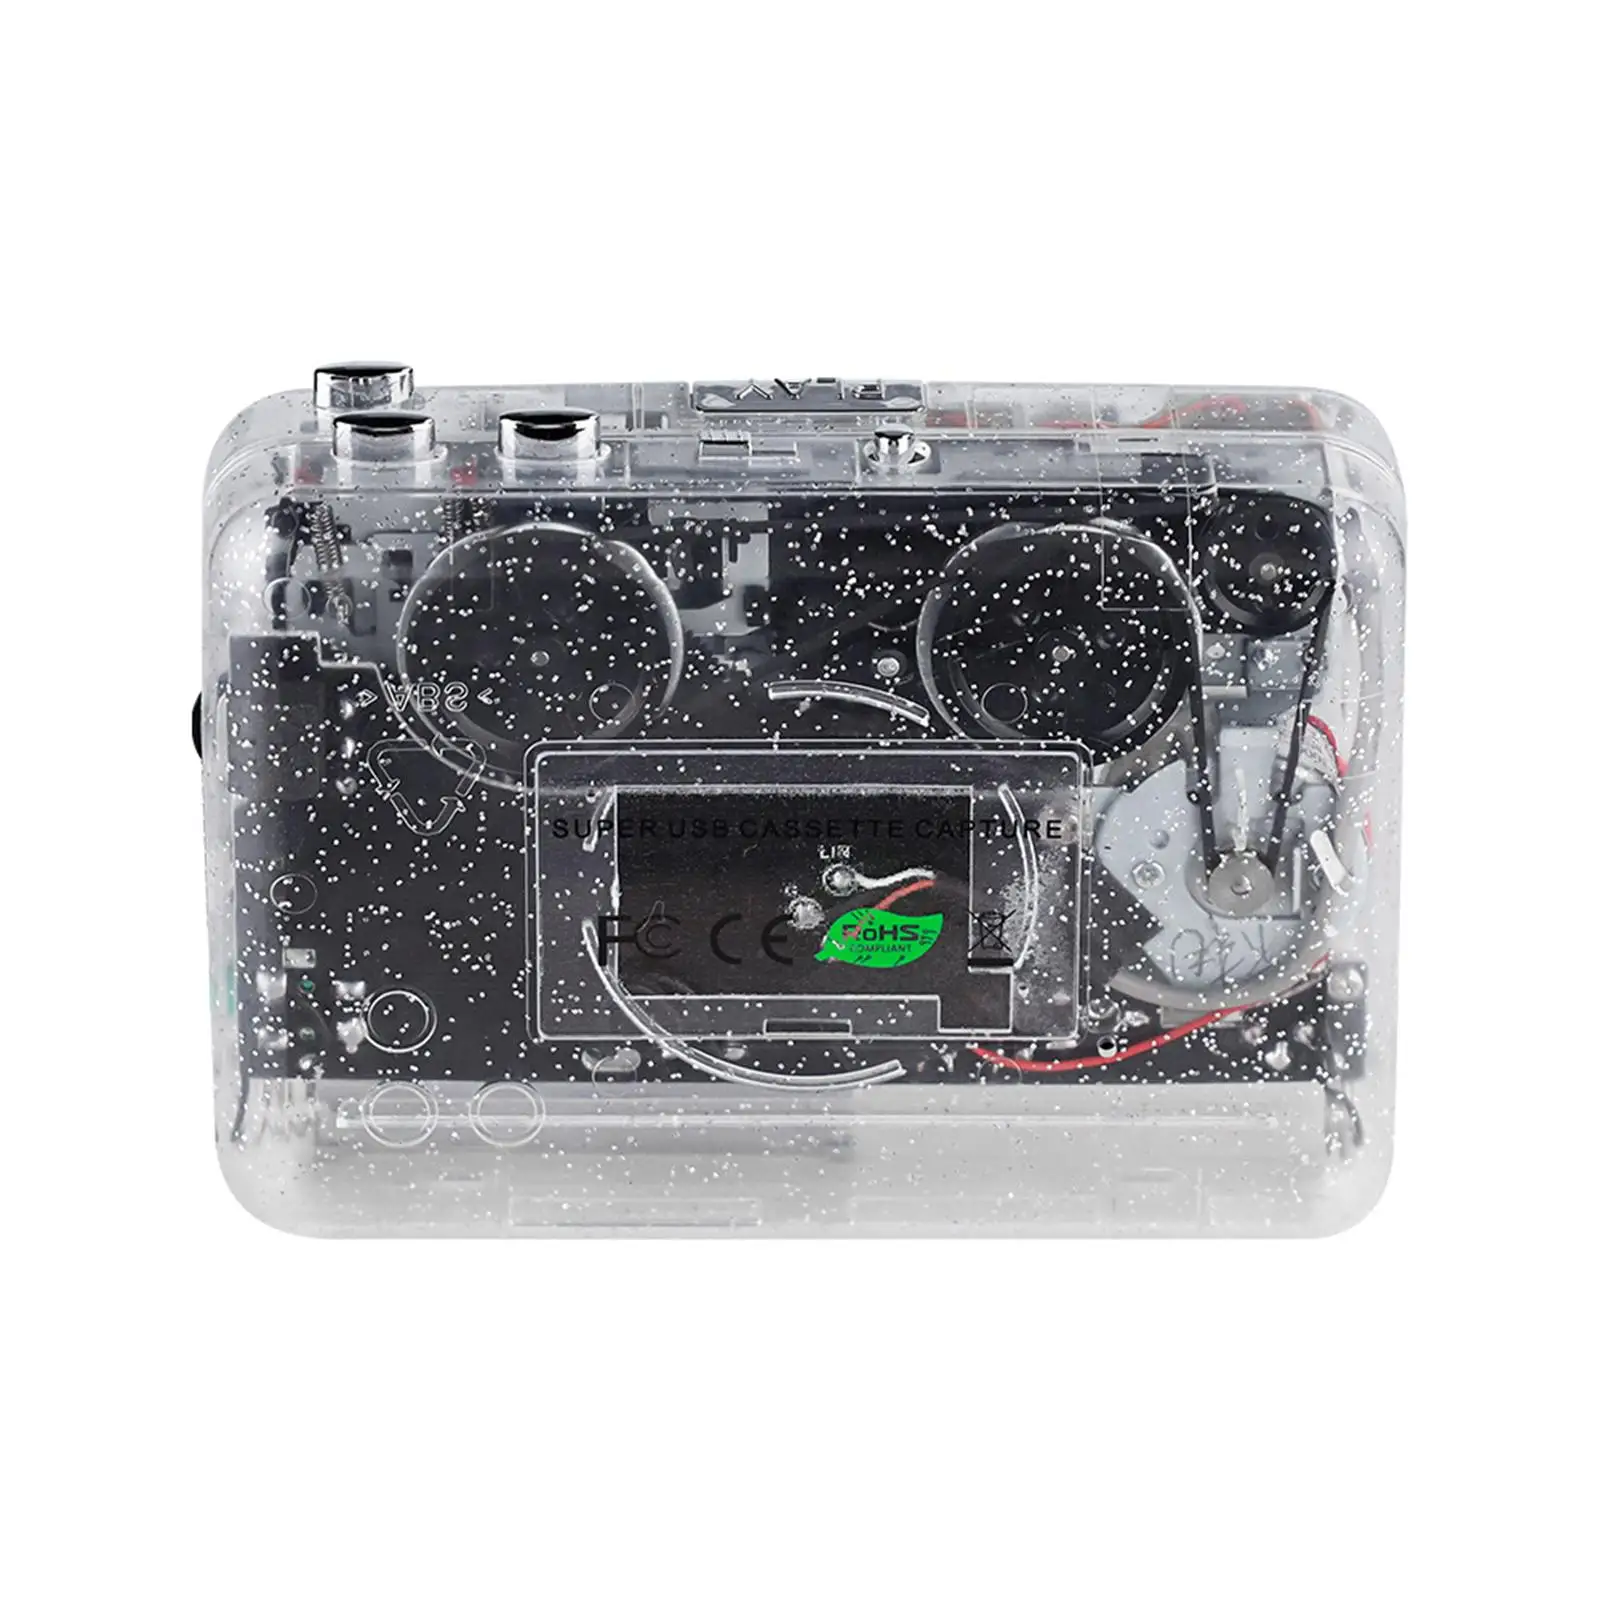 Personal Portable Radio Cassette Player Lightweight Design for Entertainment Travel Sports Portable Tape Player Compact Recorder